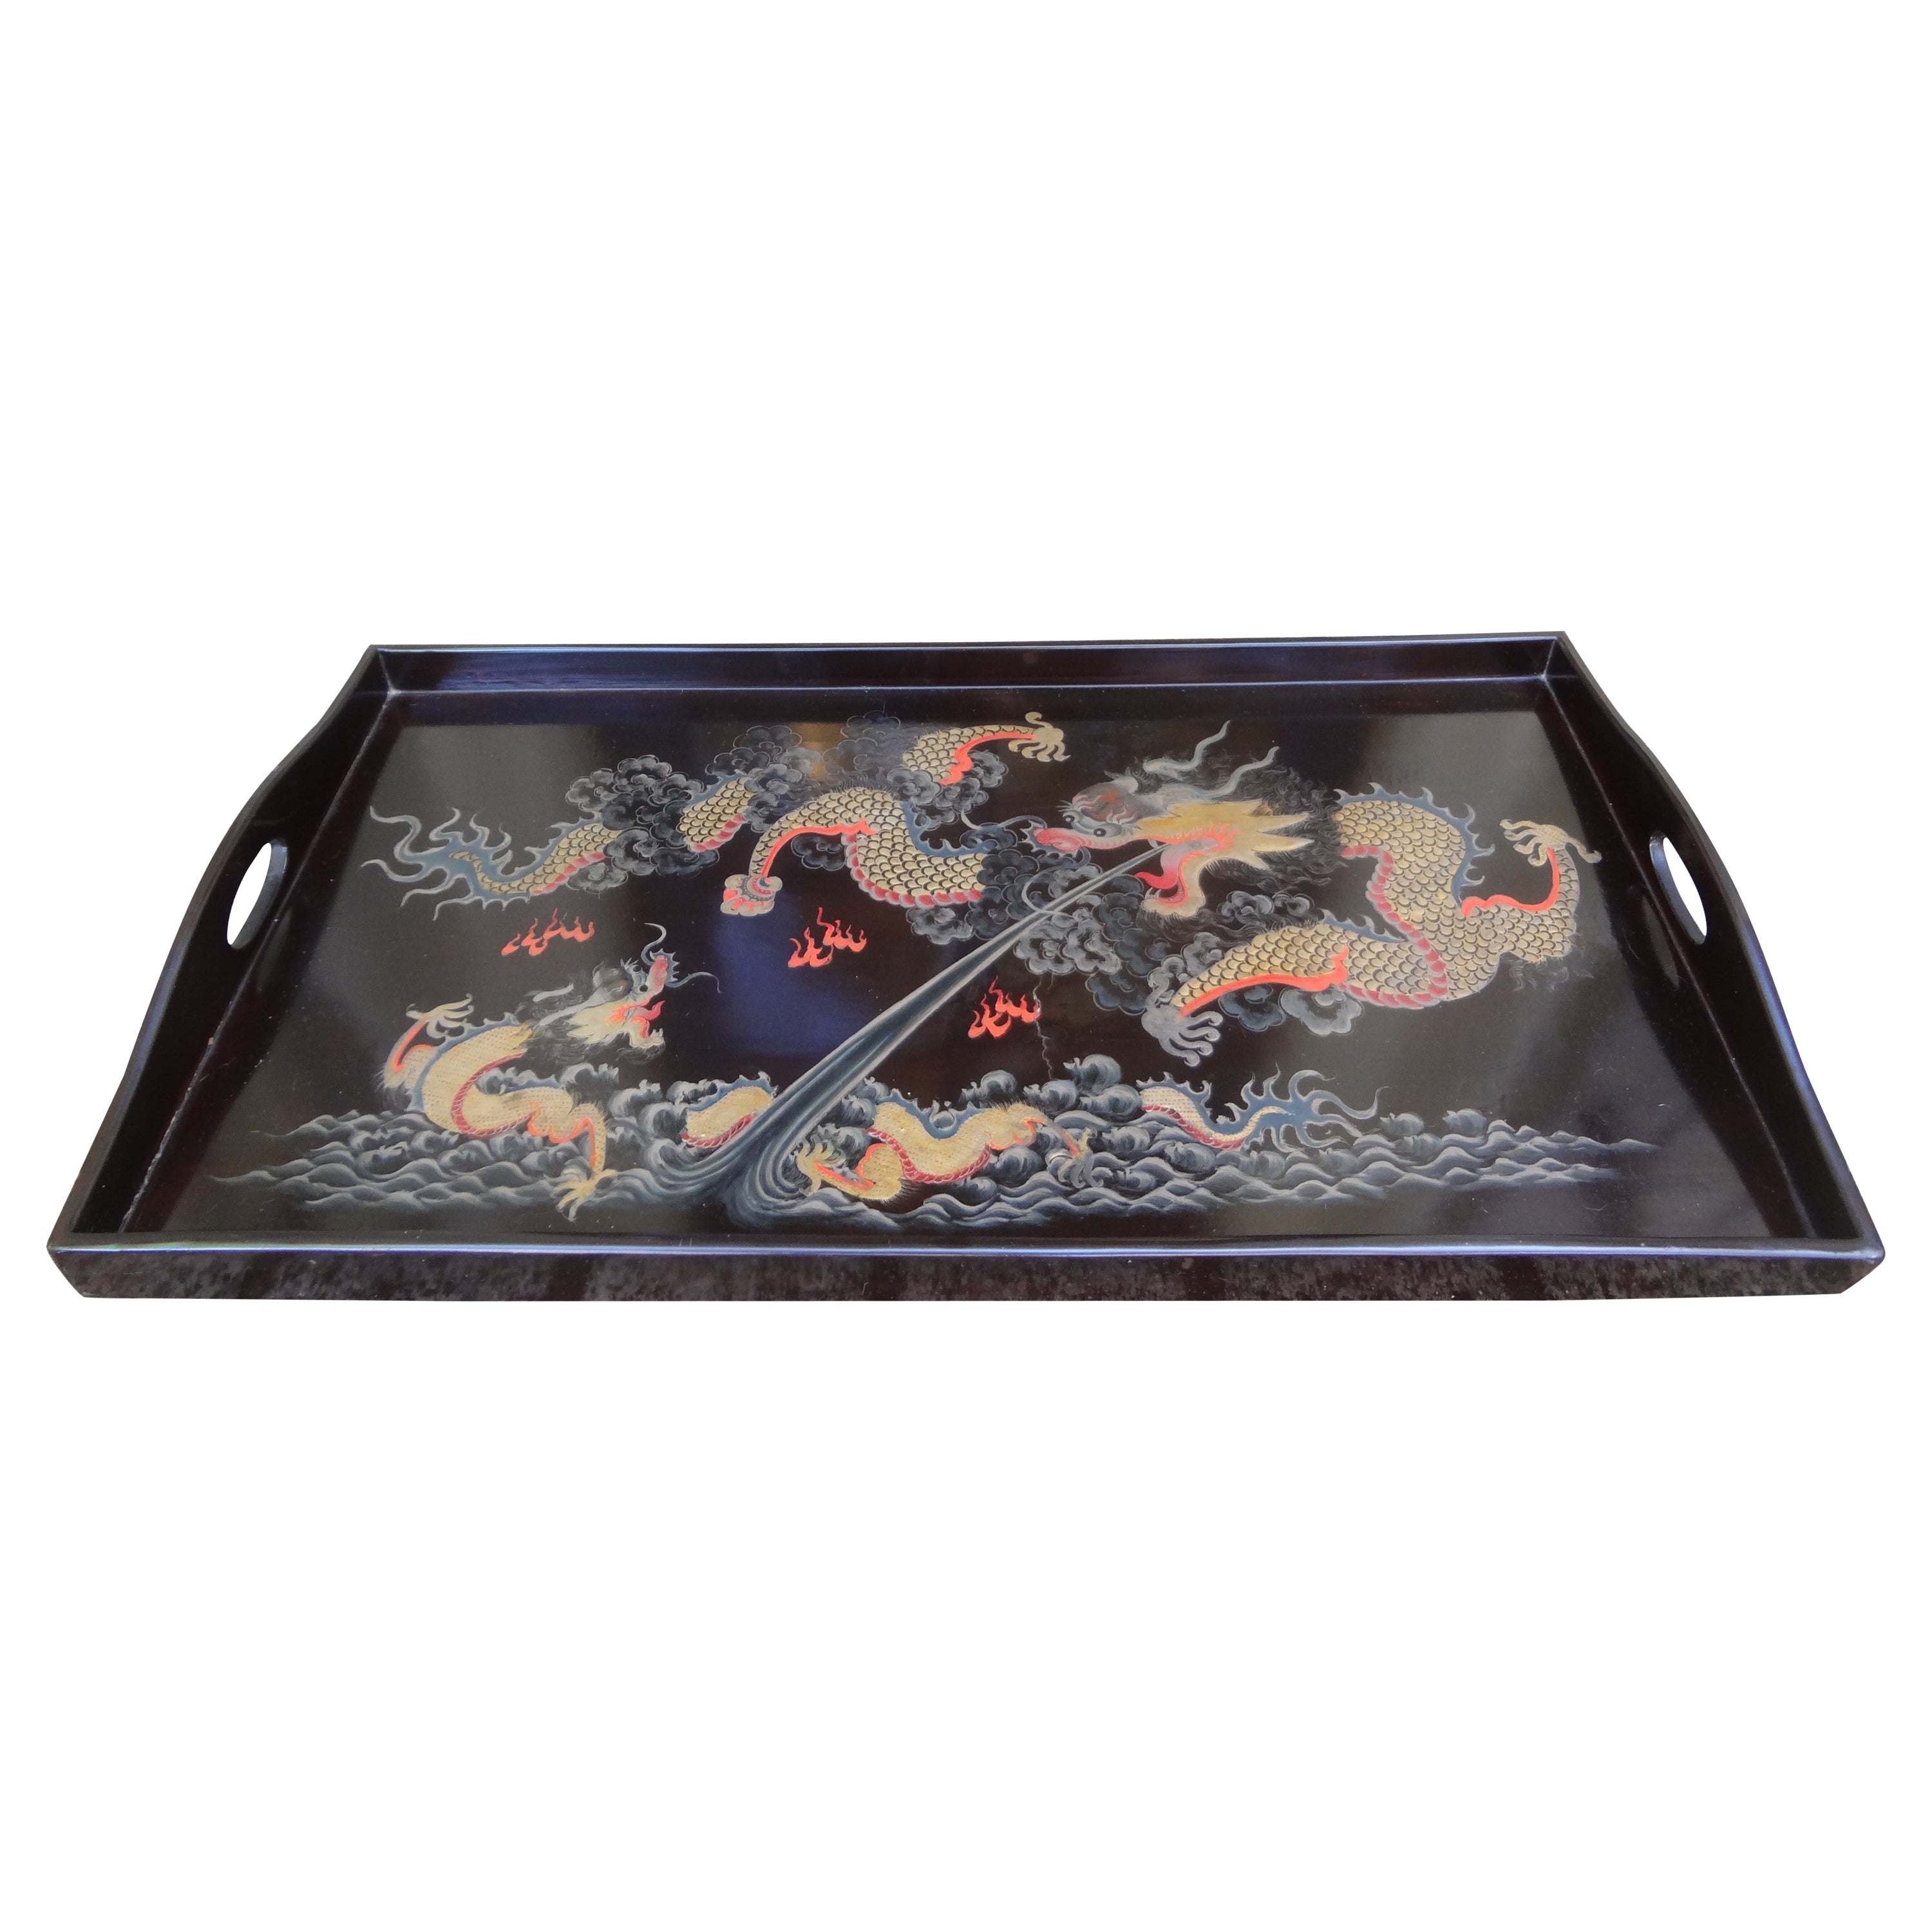 Antique Chinese Lacquer Tray With Dragons For Sale